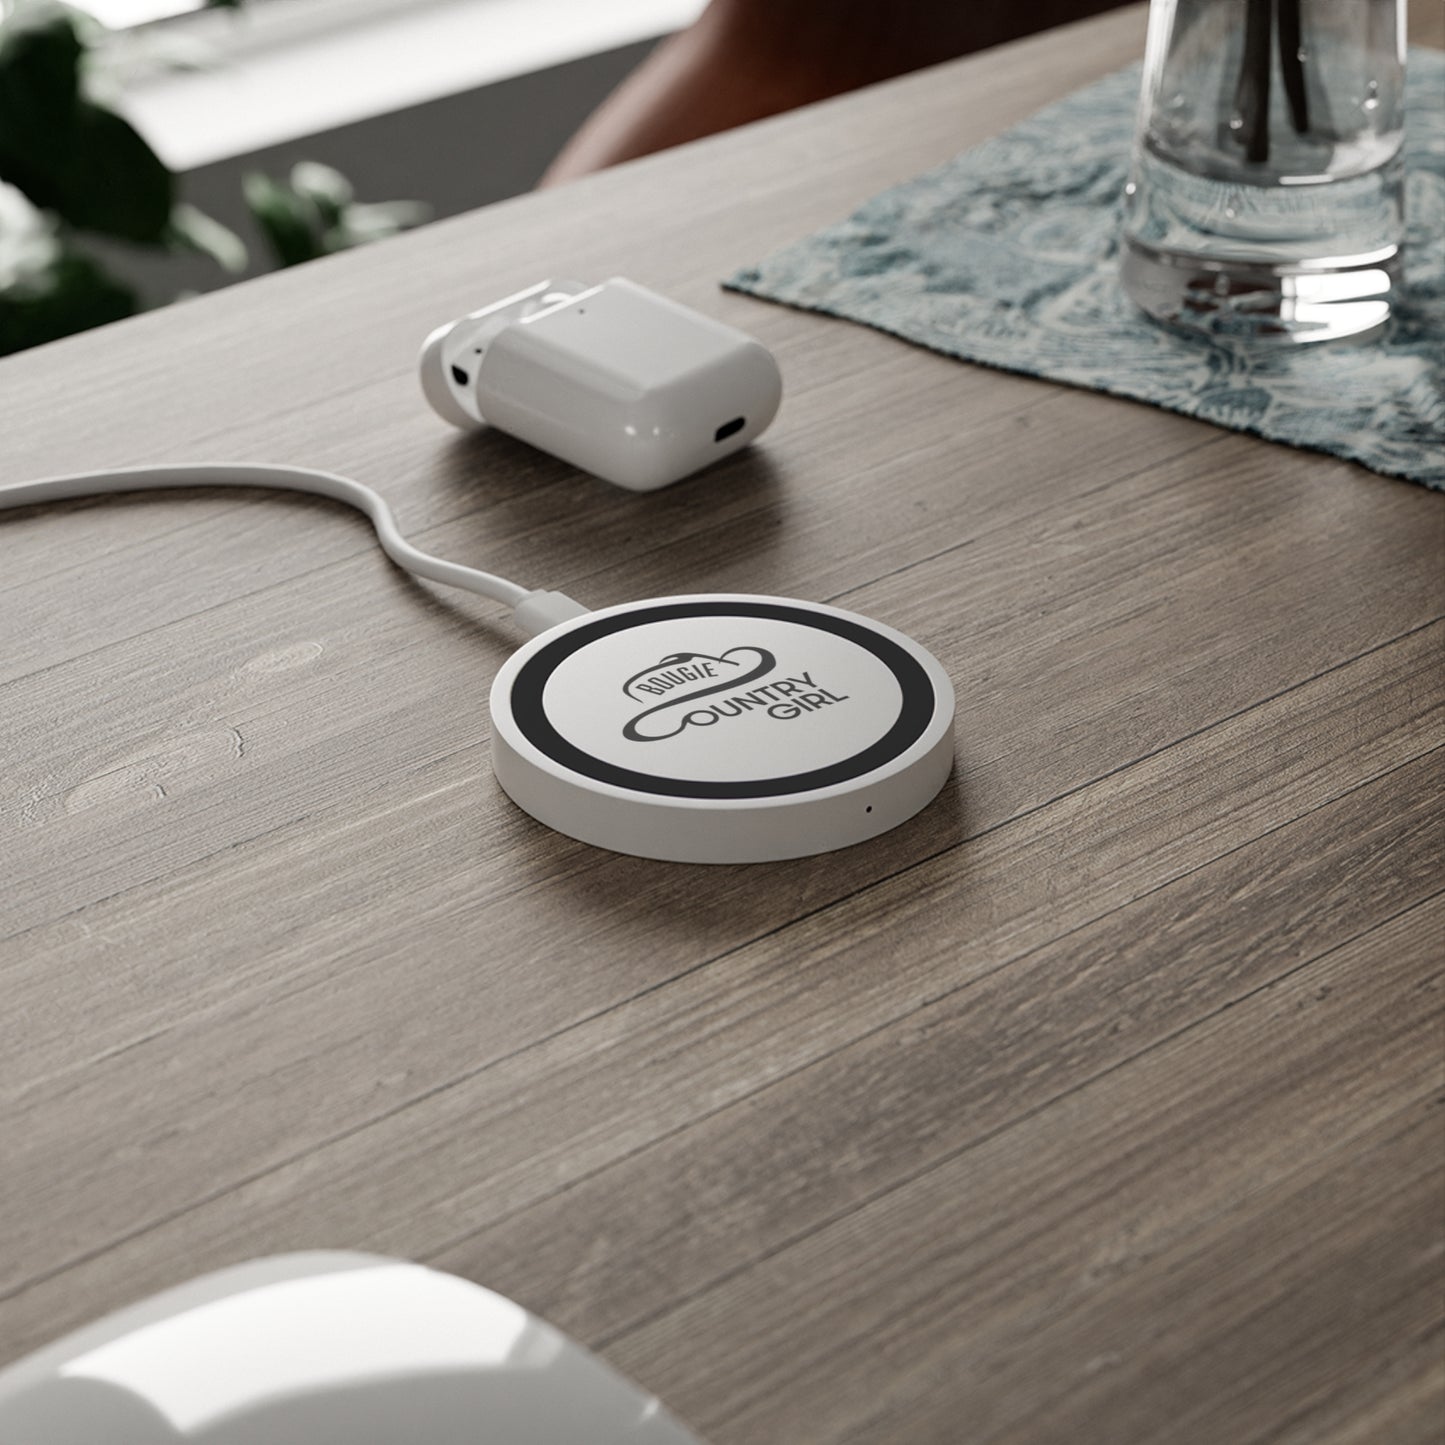 Bougie Country Girl Wireless Charging Pad